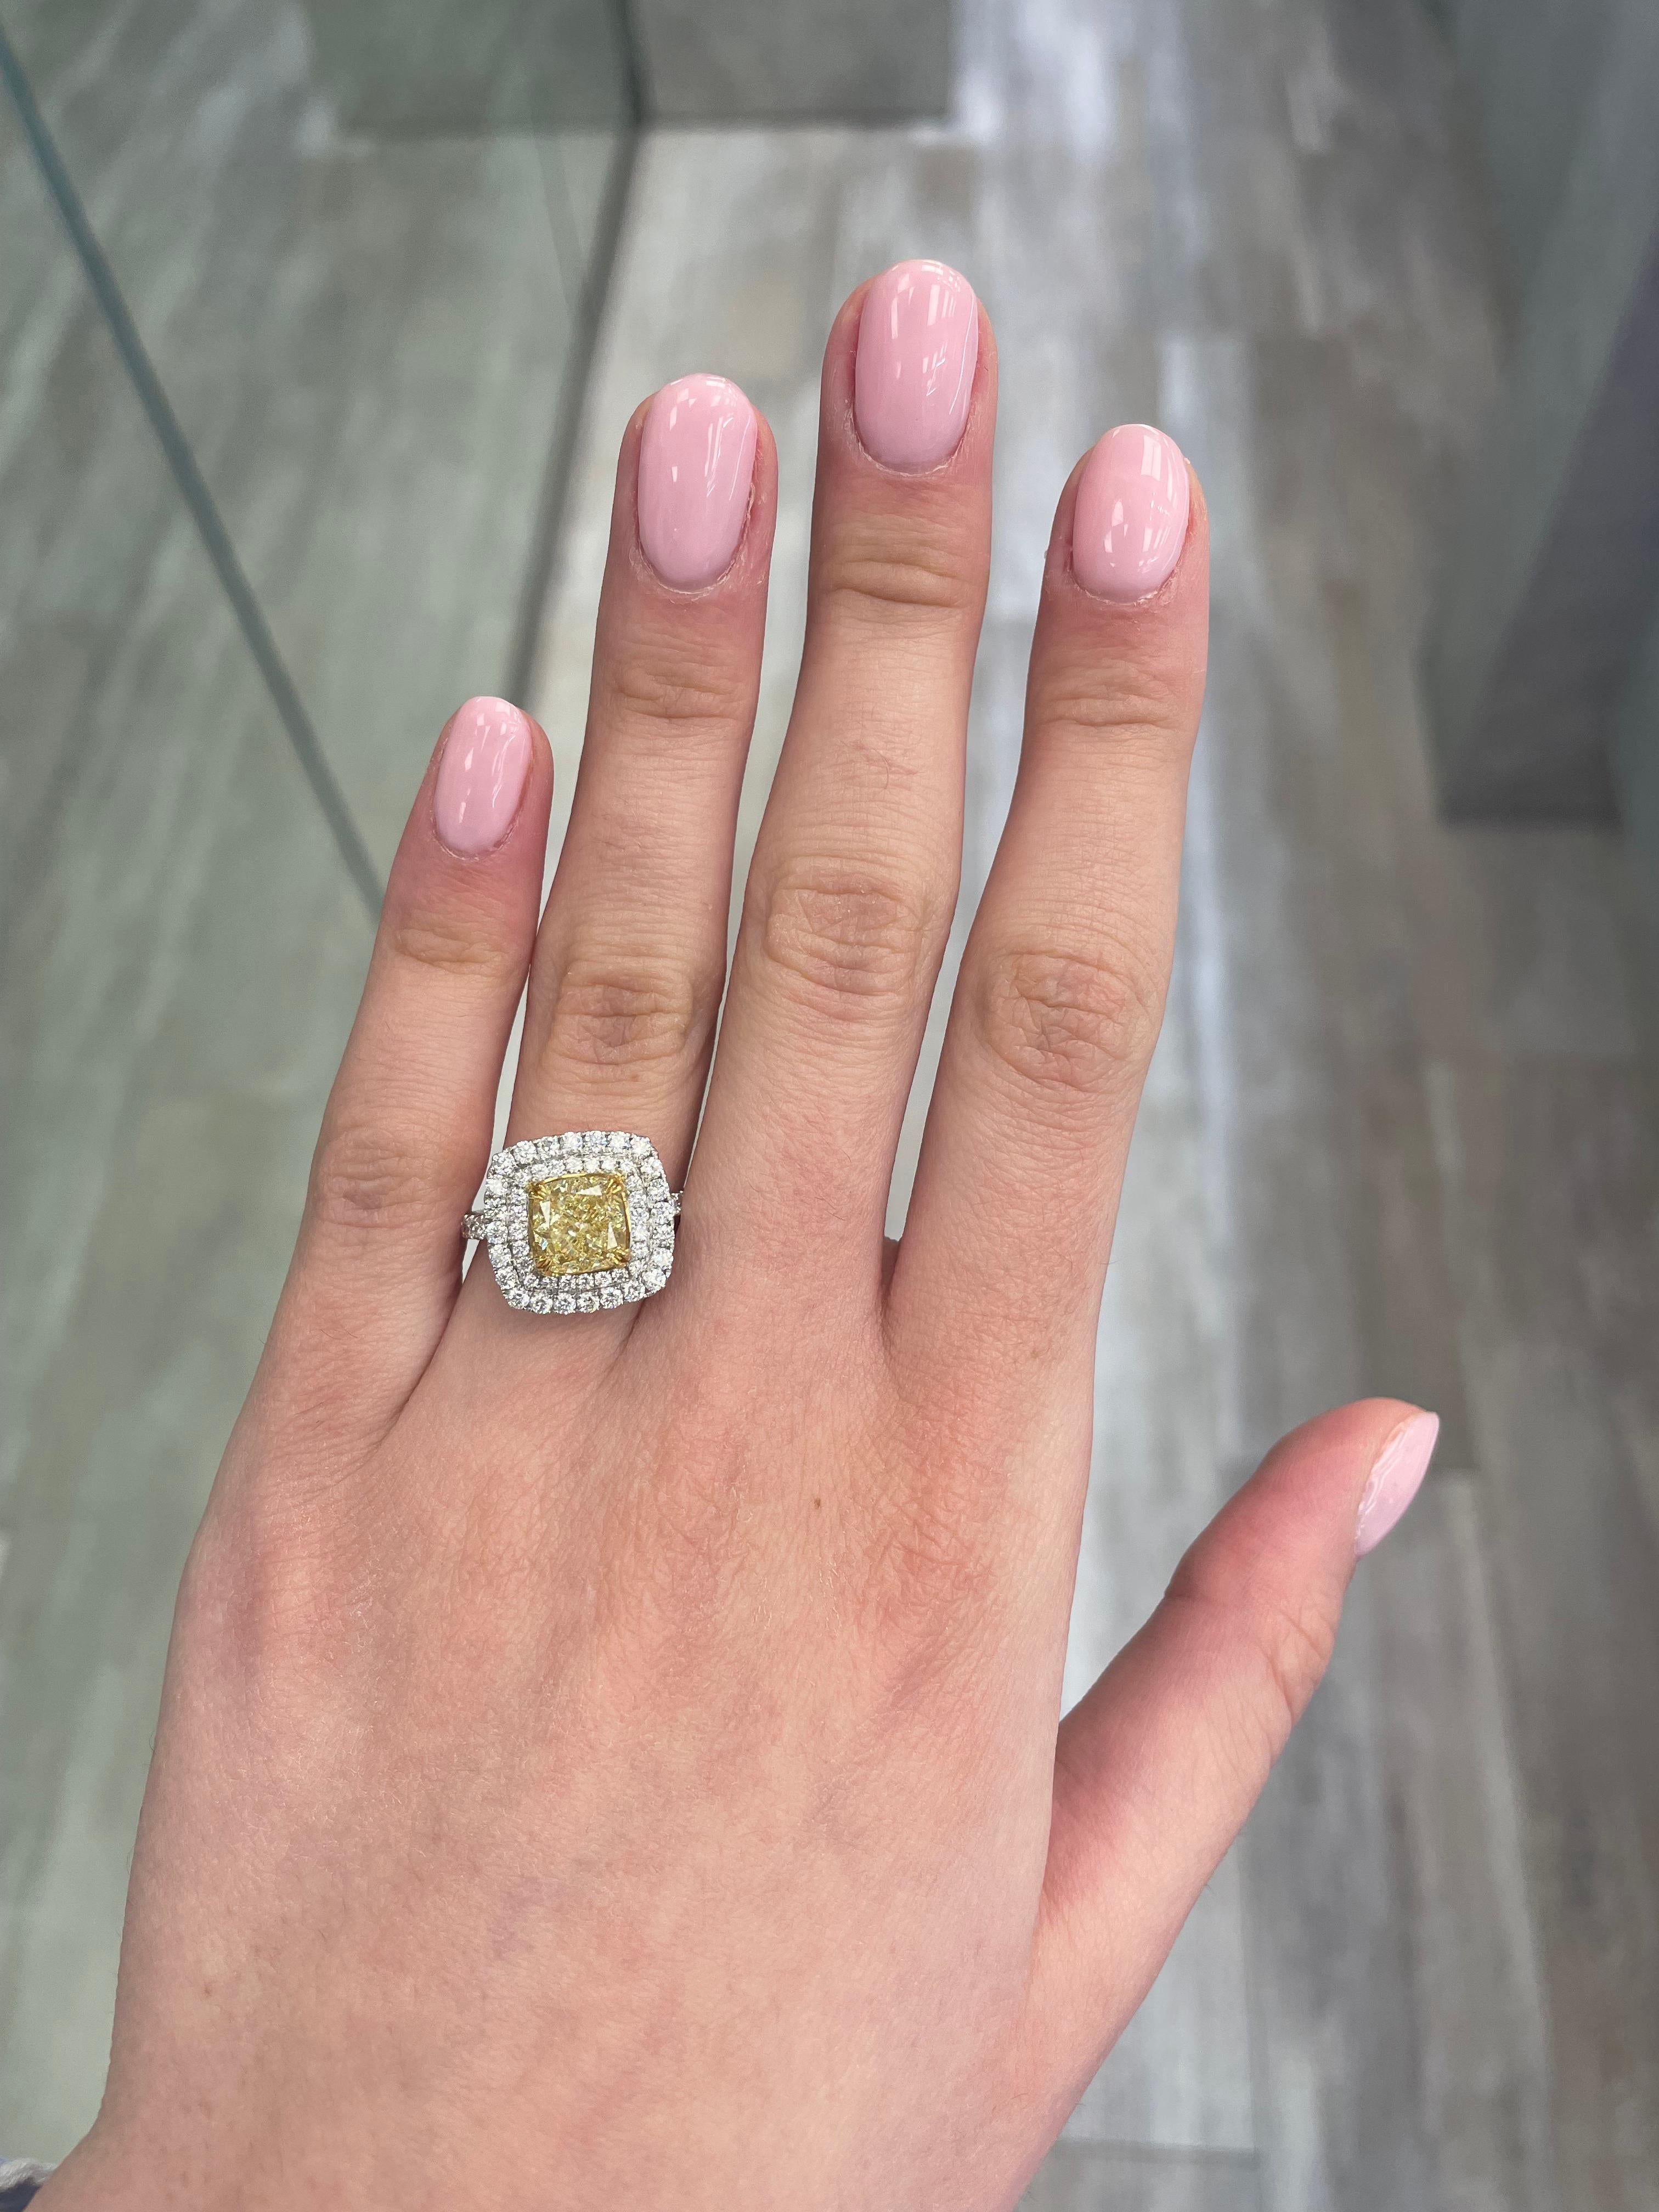 Stunning modern EGL certified fancy intense yellow diamond double halo ring, two-tone 18k yellow and white gold. By Alexander Beverly Hills
3.35 carats total diamond weight.
2.42 carat cushion cut Fancy Intense Yellow color and VS2 clarity diamond,